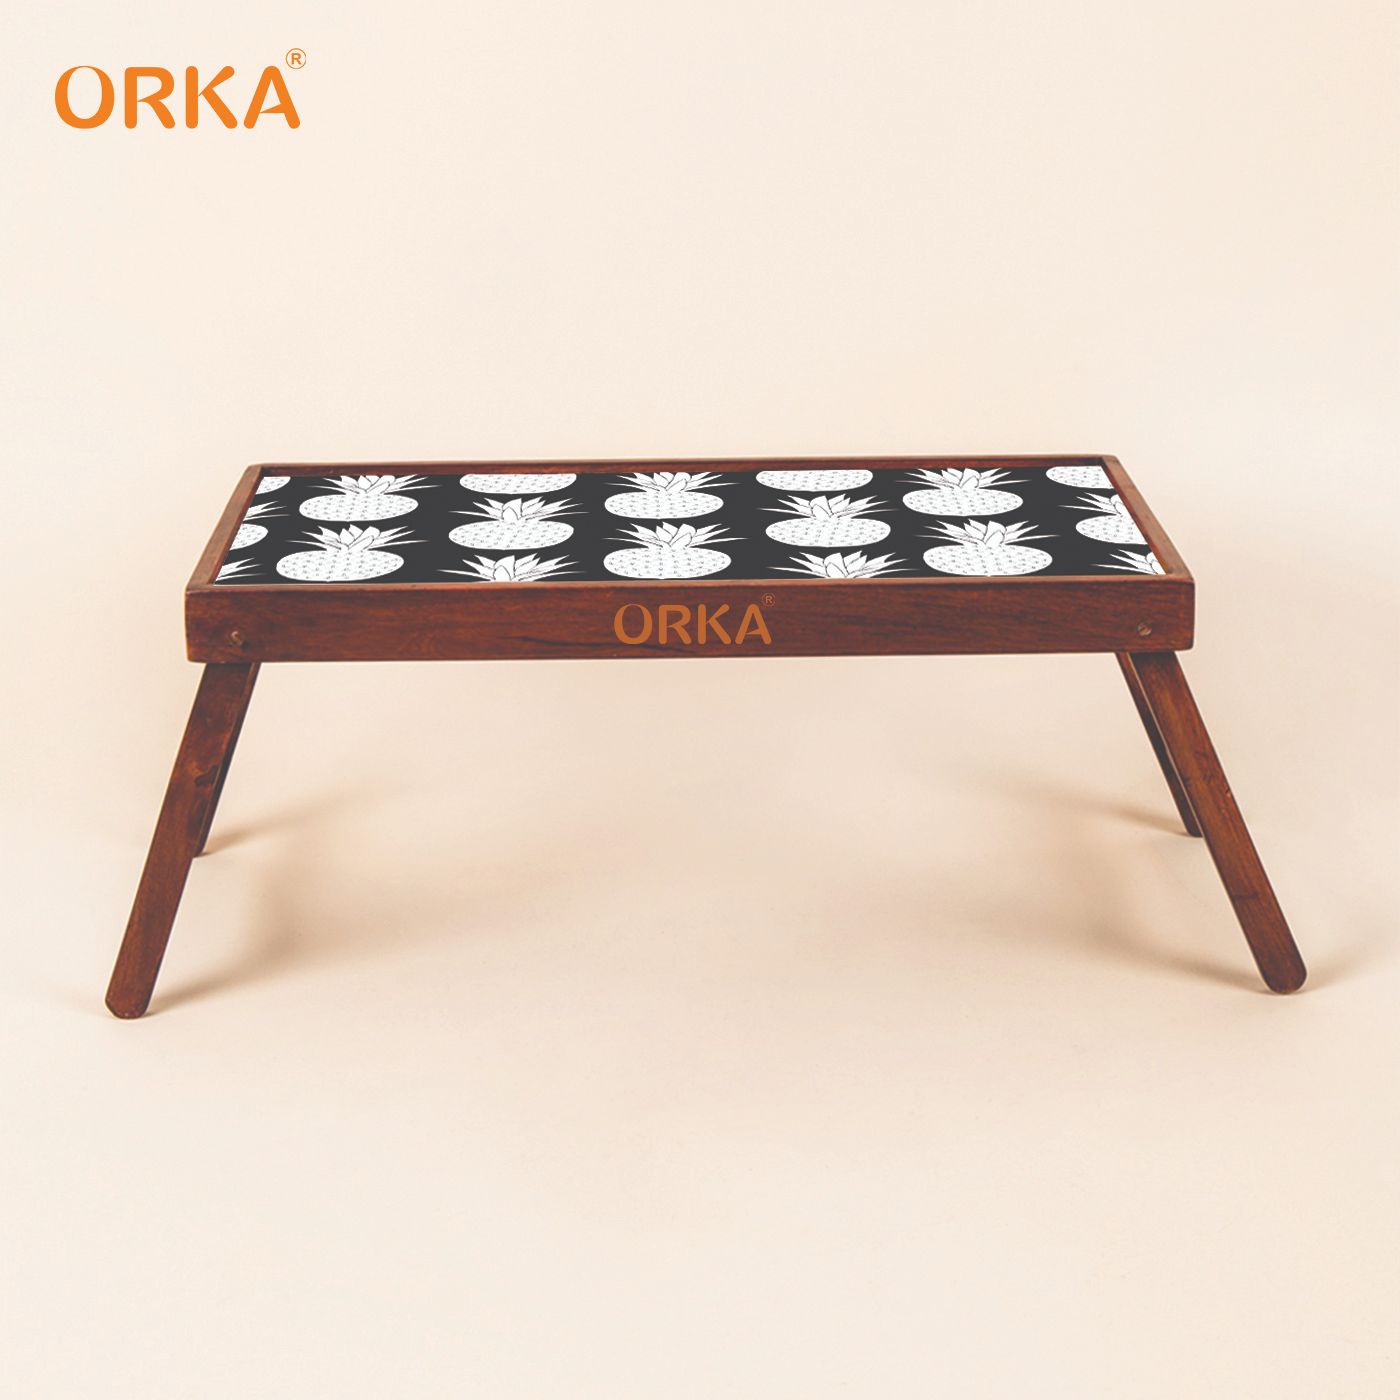 ORKA Spiny Apples Foldable Pine Wood Breakfast Table (Black, White)  